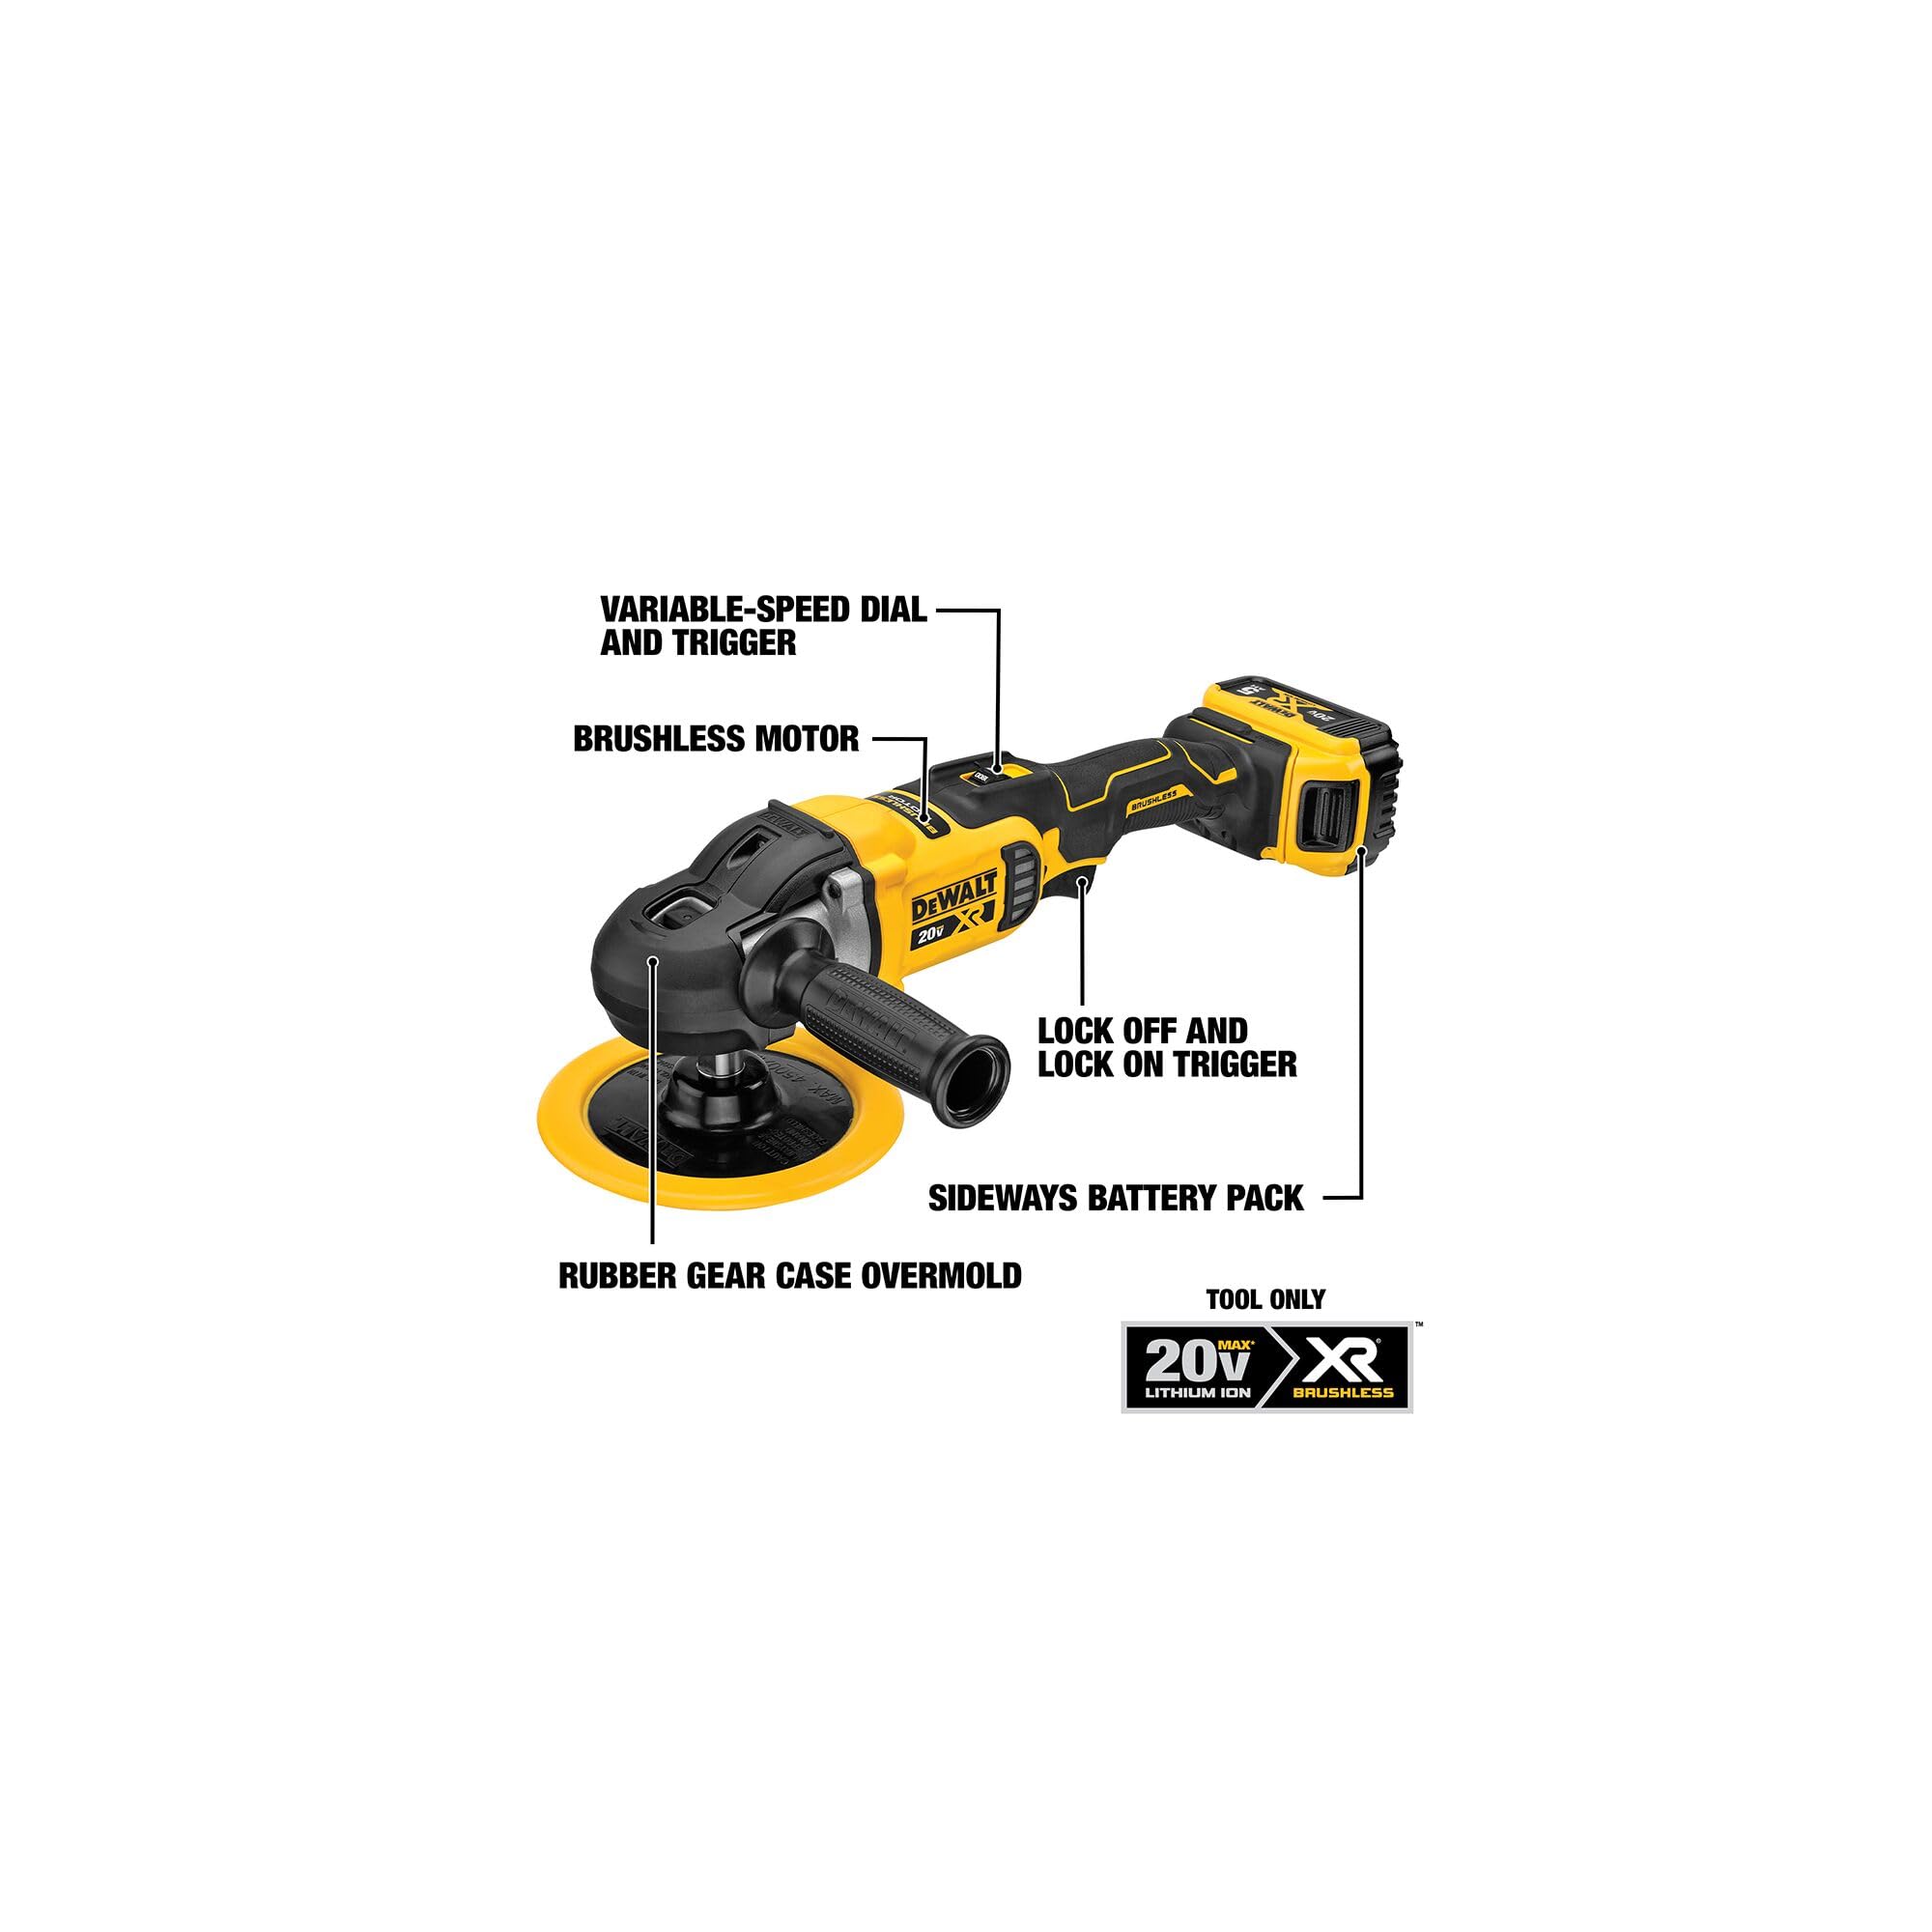 DEWALT 20V MAX* XR Cordless Polisher, Rotary, Variable Speed, 7-Inch, 180 mm, Tool Only (DCM849B)  - Like New